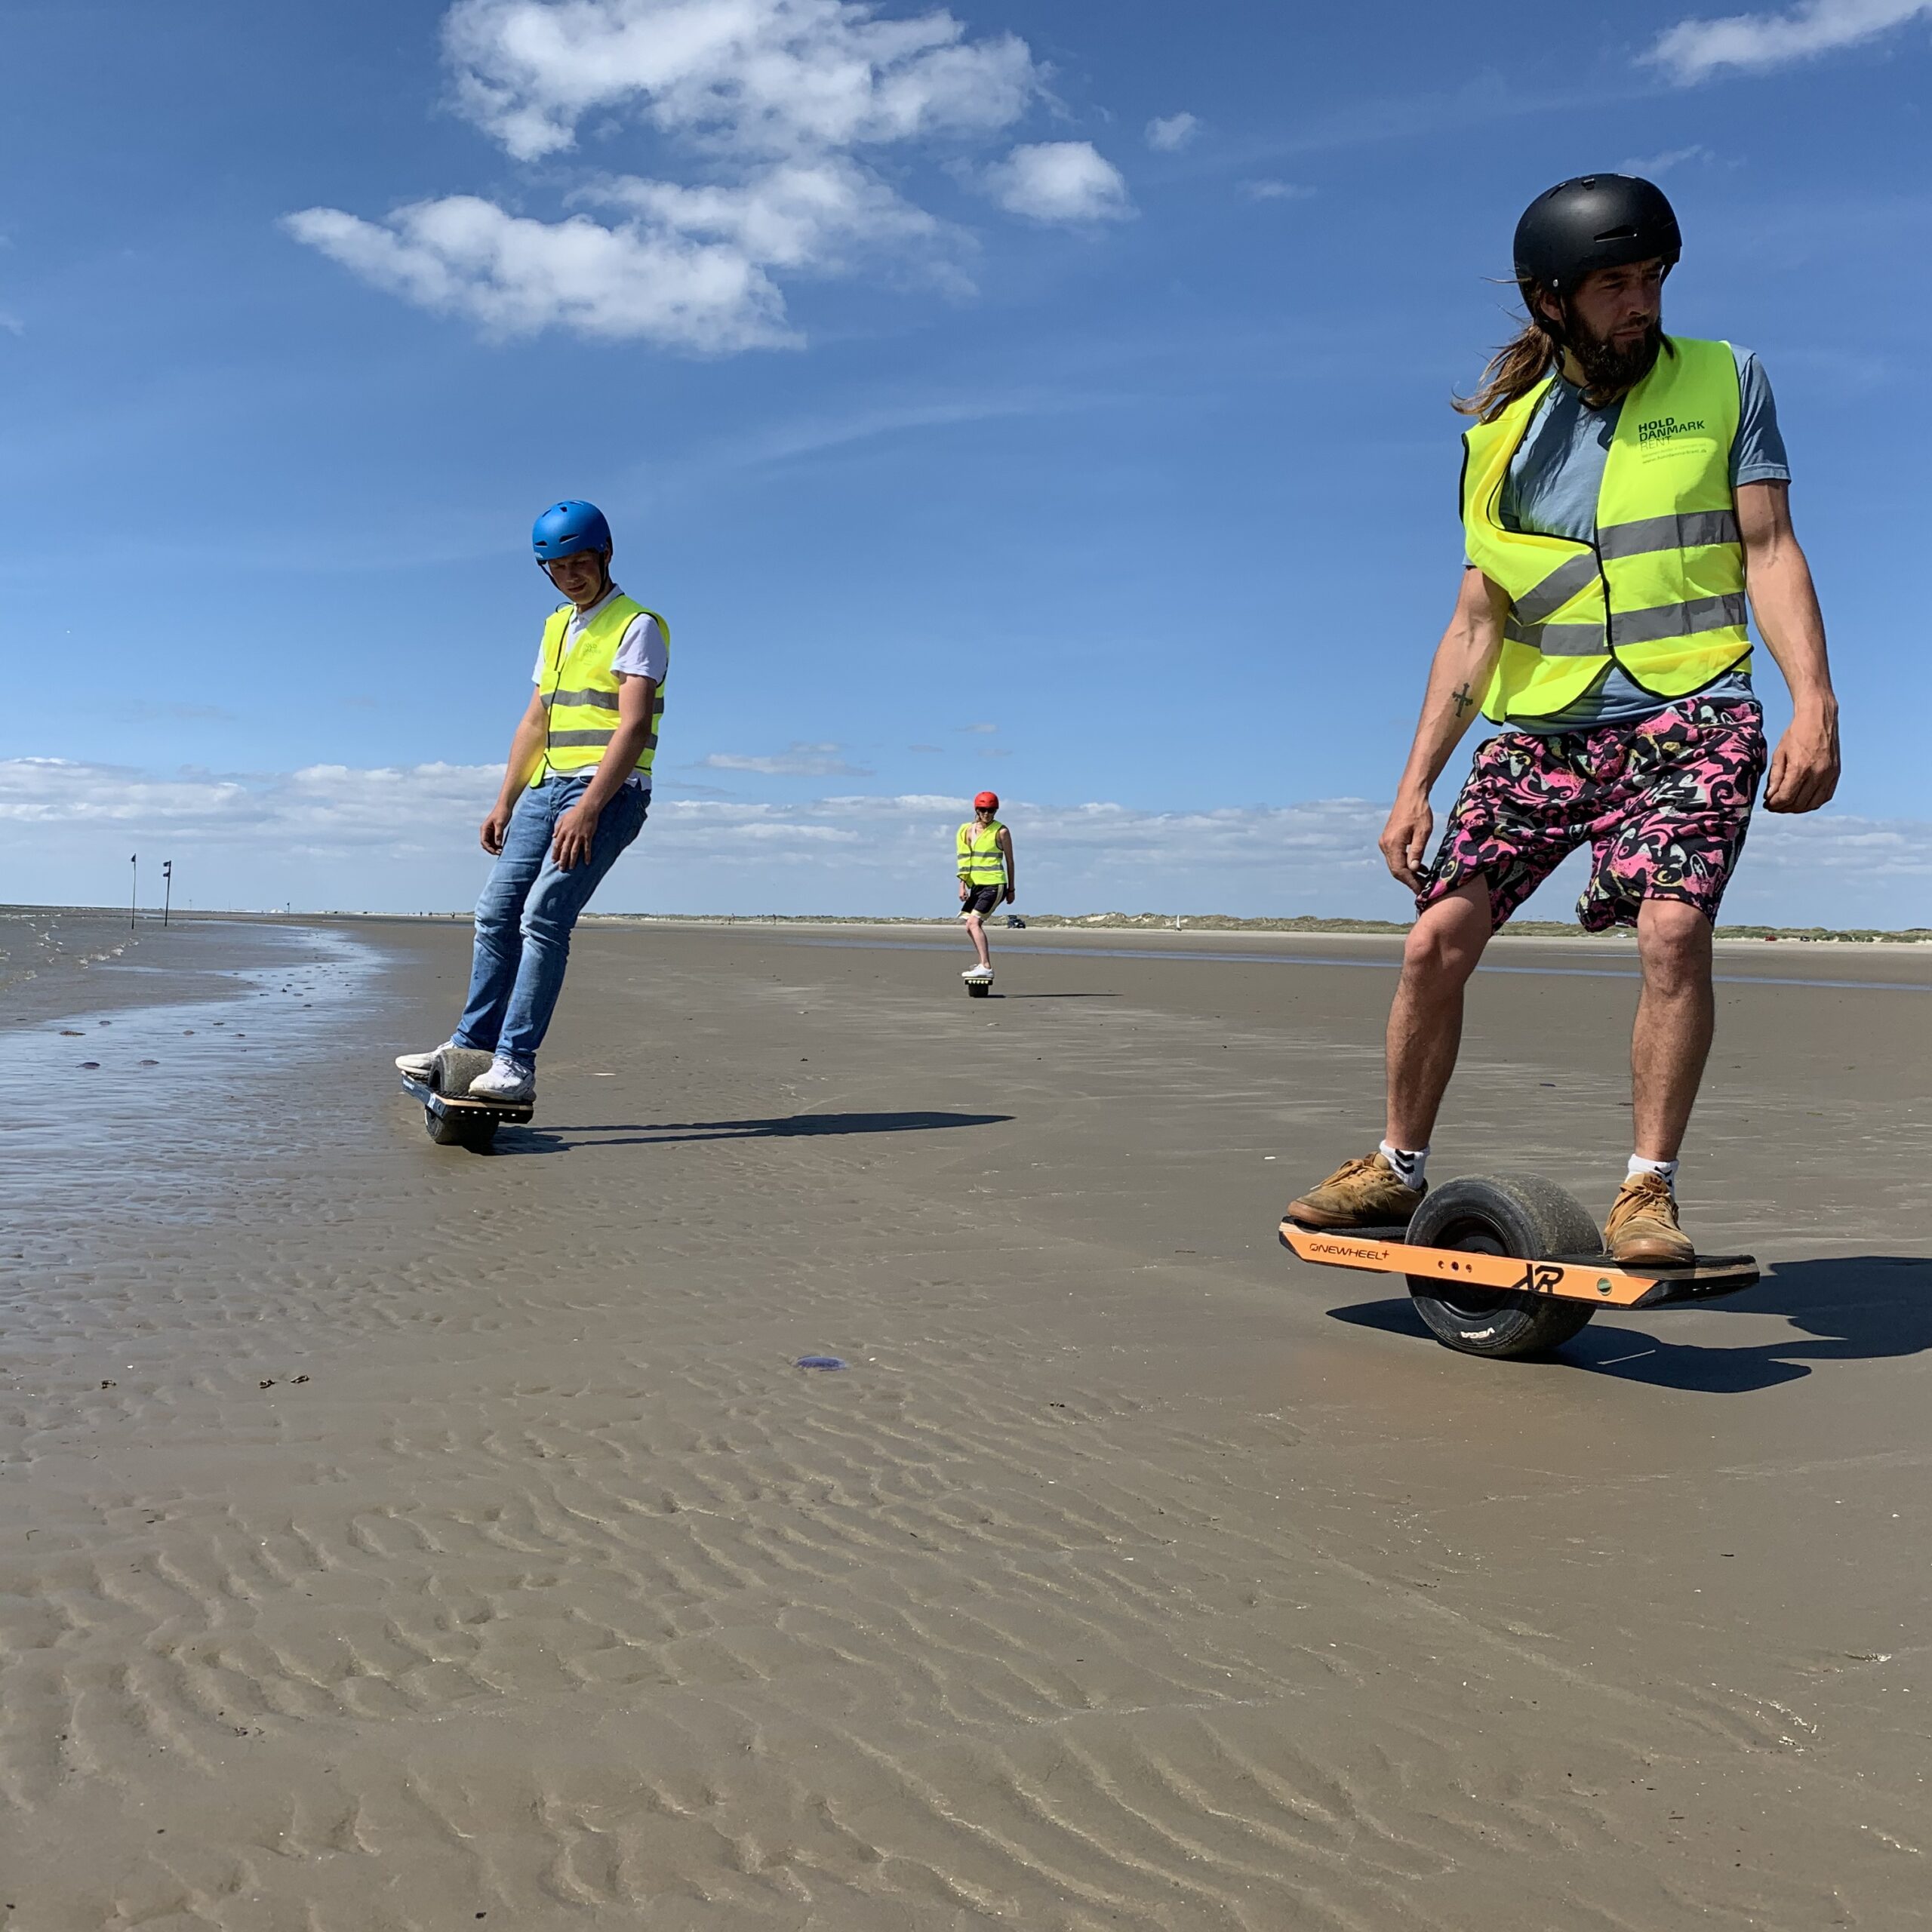 One-Wheelers are fun and safe to drive. Learn it in Club Fanø